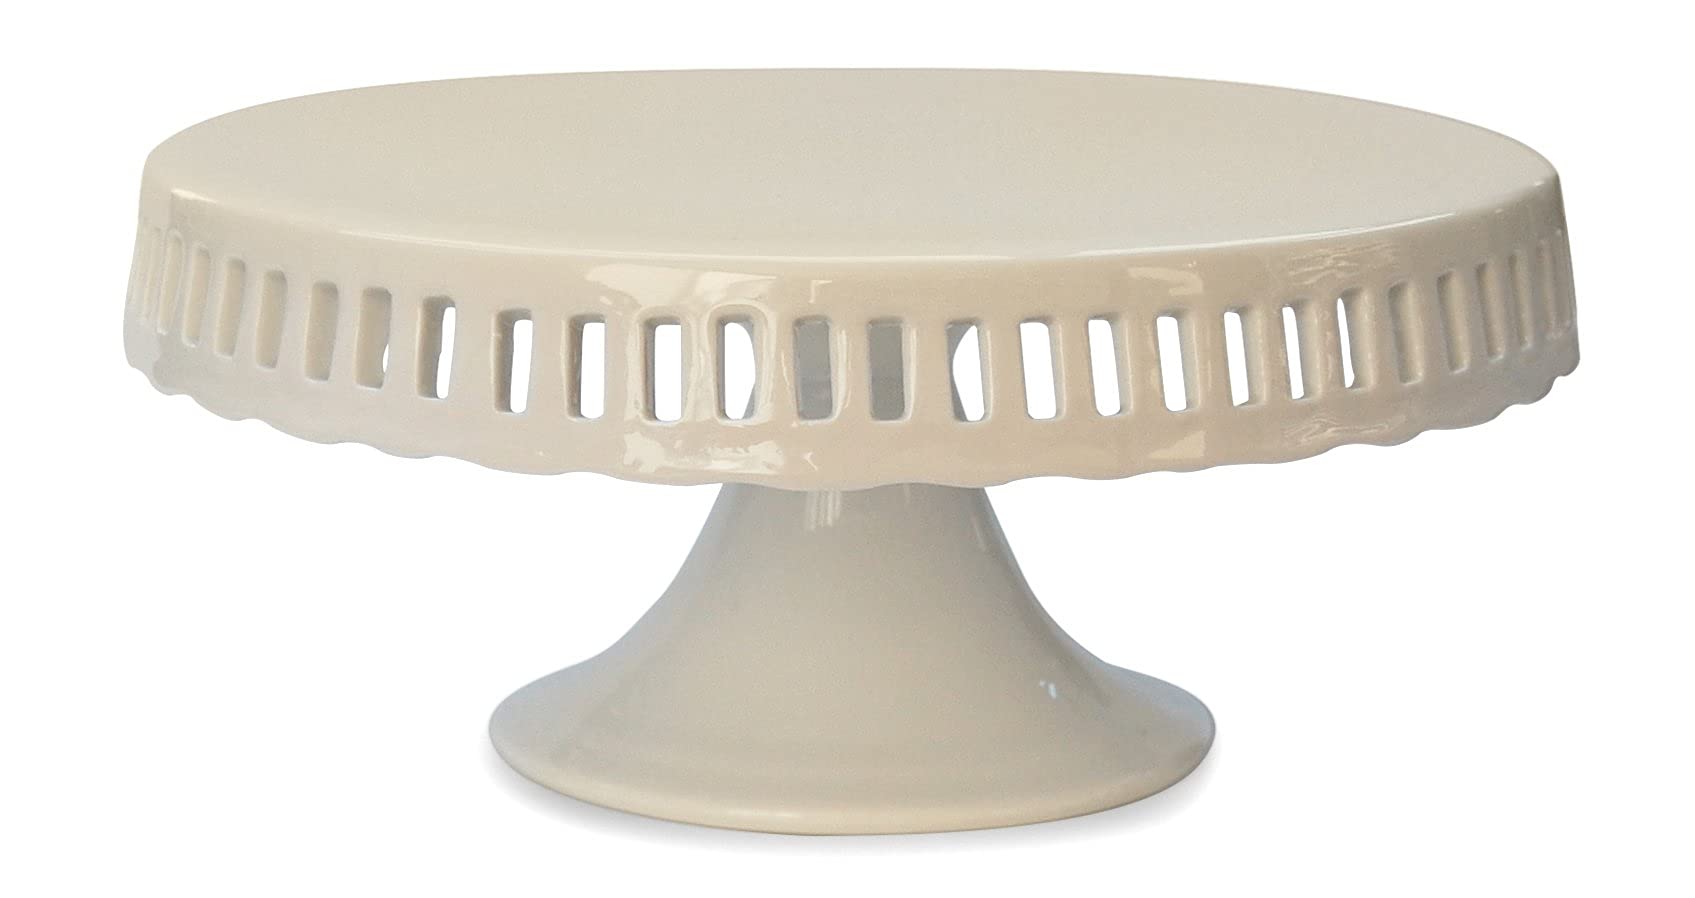 10 inch Pedestal Footed Cake Display Stand with Scalloped Edge and Interchangeable Ribbon Trim (Includes 3 Grosgrain Ribbons) Perfect for Wedding Cakes Baby Showers Birthdays